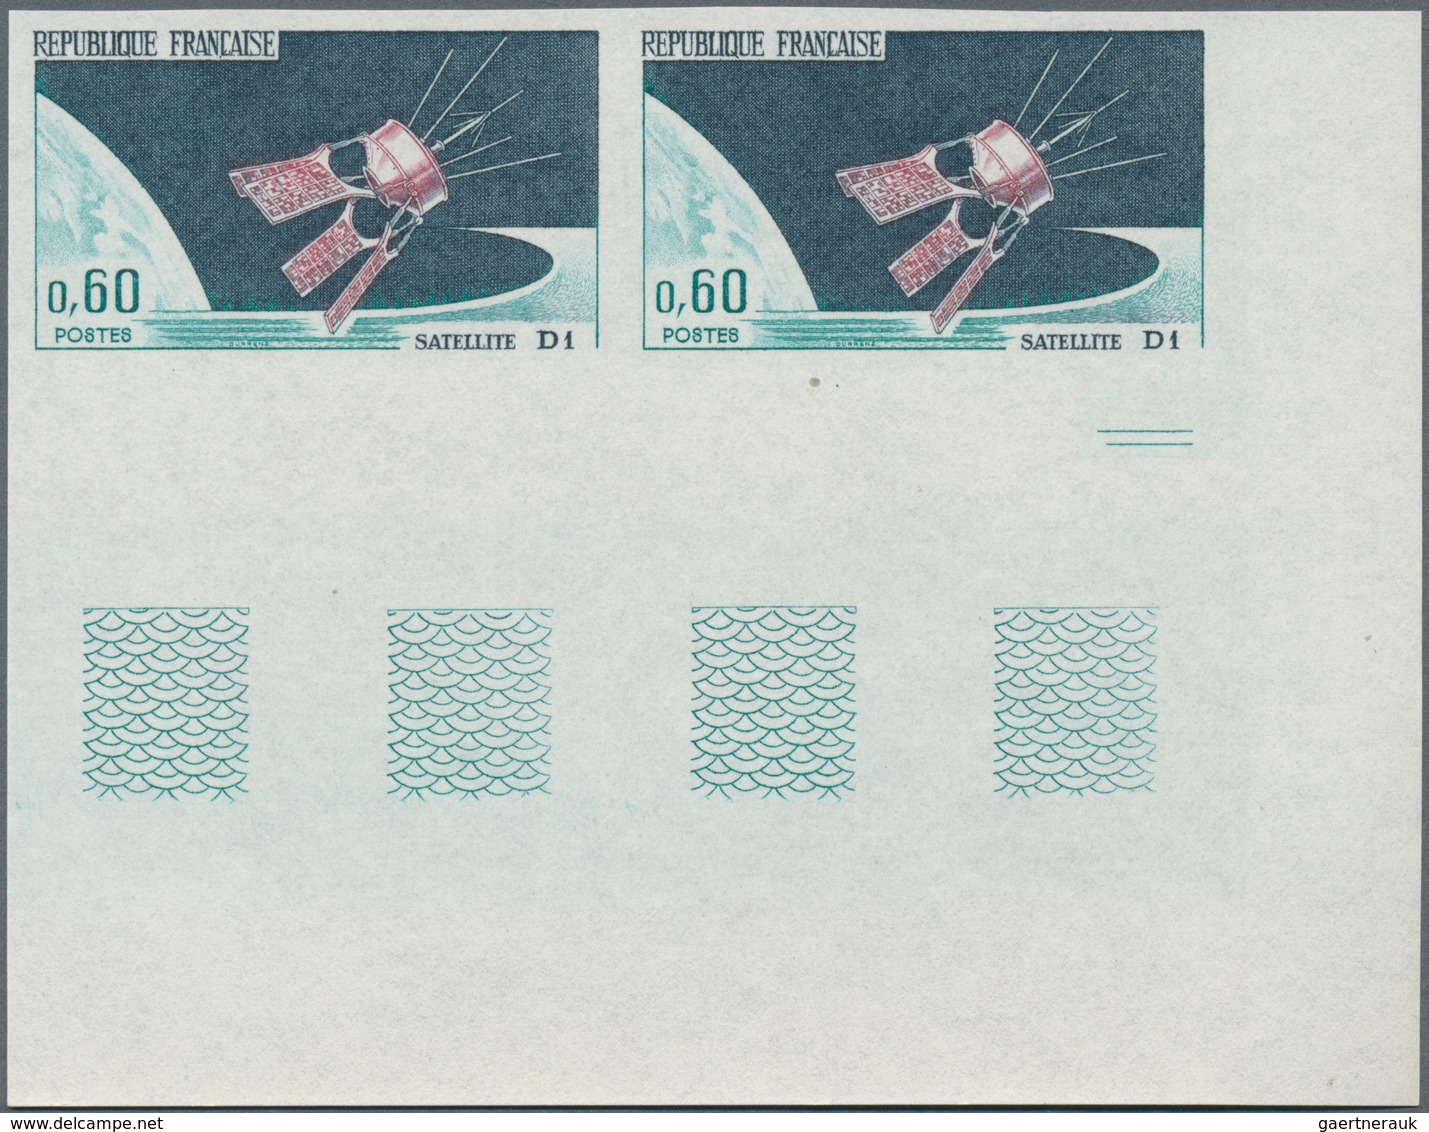 Frankreich: 1943/1974, incredible dealer stock on stockcards with approx. 2.300 IMPERFORATE stamps a